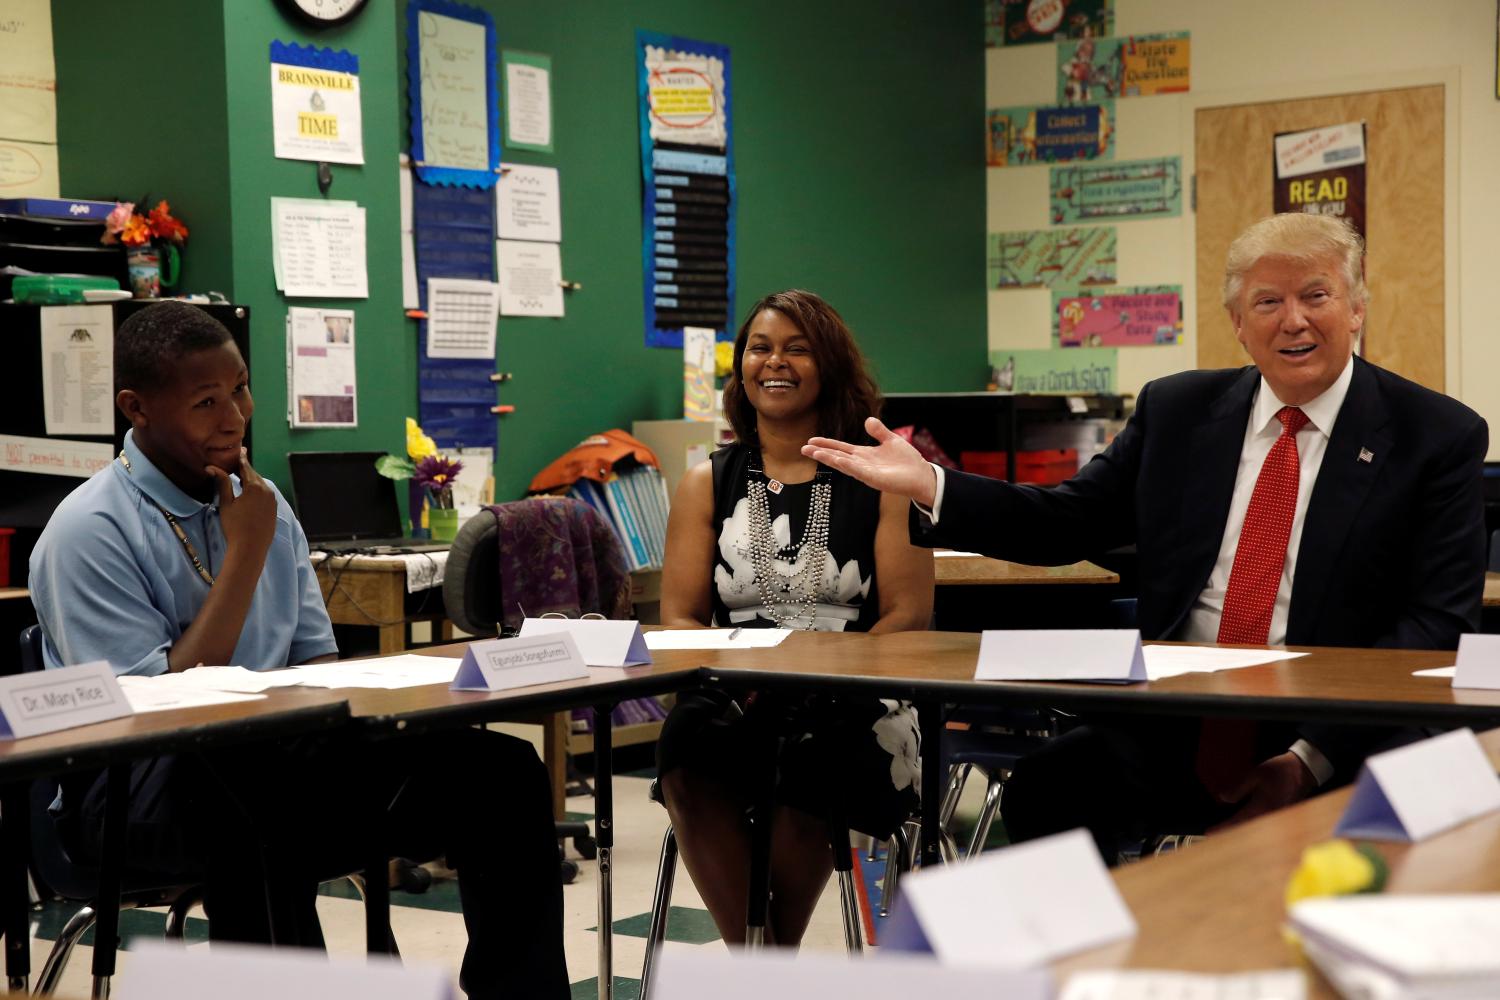 Republican presidential nominee Donald Trump gestures as he sits with 12 year old student Egunjobi Songofunmi and Head of School Debroah Mays during a campaign visit to the Cleveland Arts and Social Sciences Academy in Cleveland